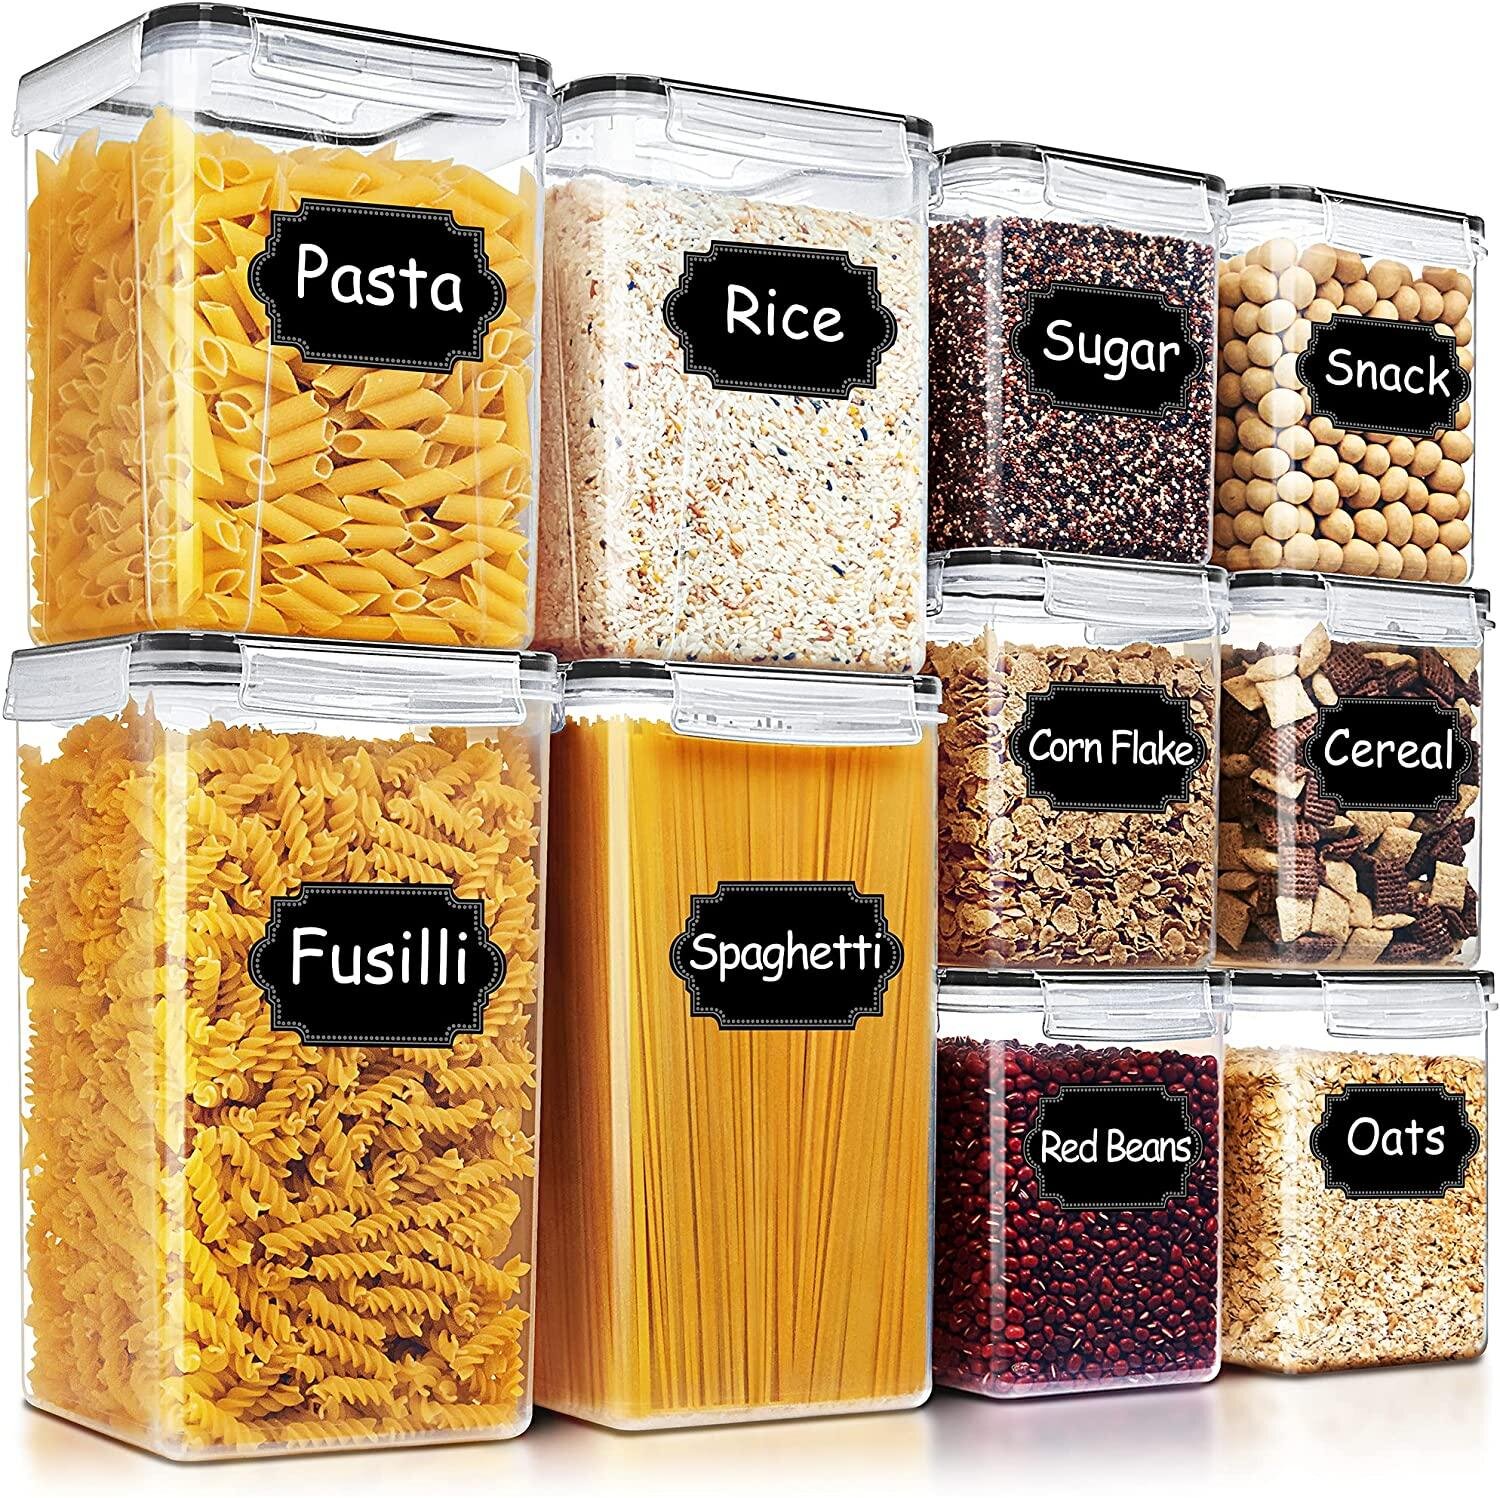 Prep & Savour Airtight Food Storage Containers - Blingco Large Cereal & Dry Food Storage Containers 10 PCS, Kitchen & Pantry Organization Canisters With Lids - BPA Free For Flour, Sugar, Baking